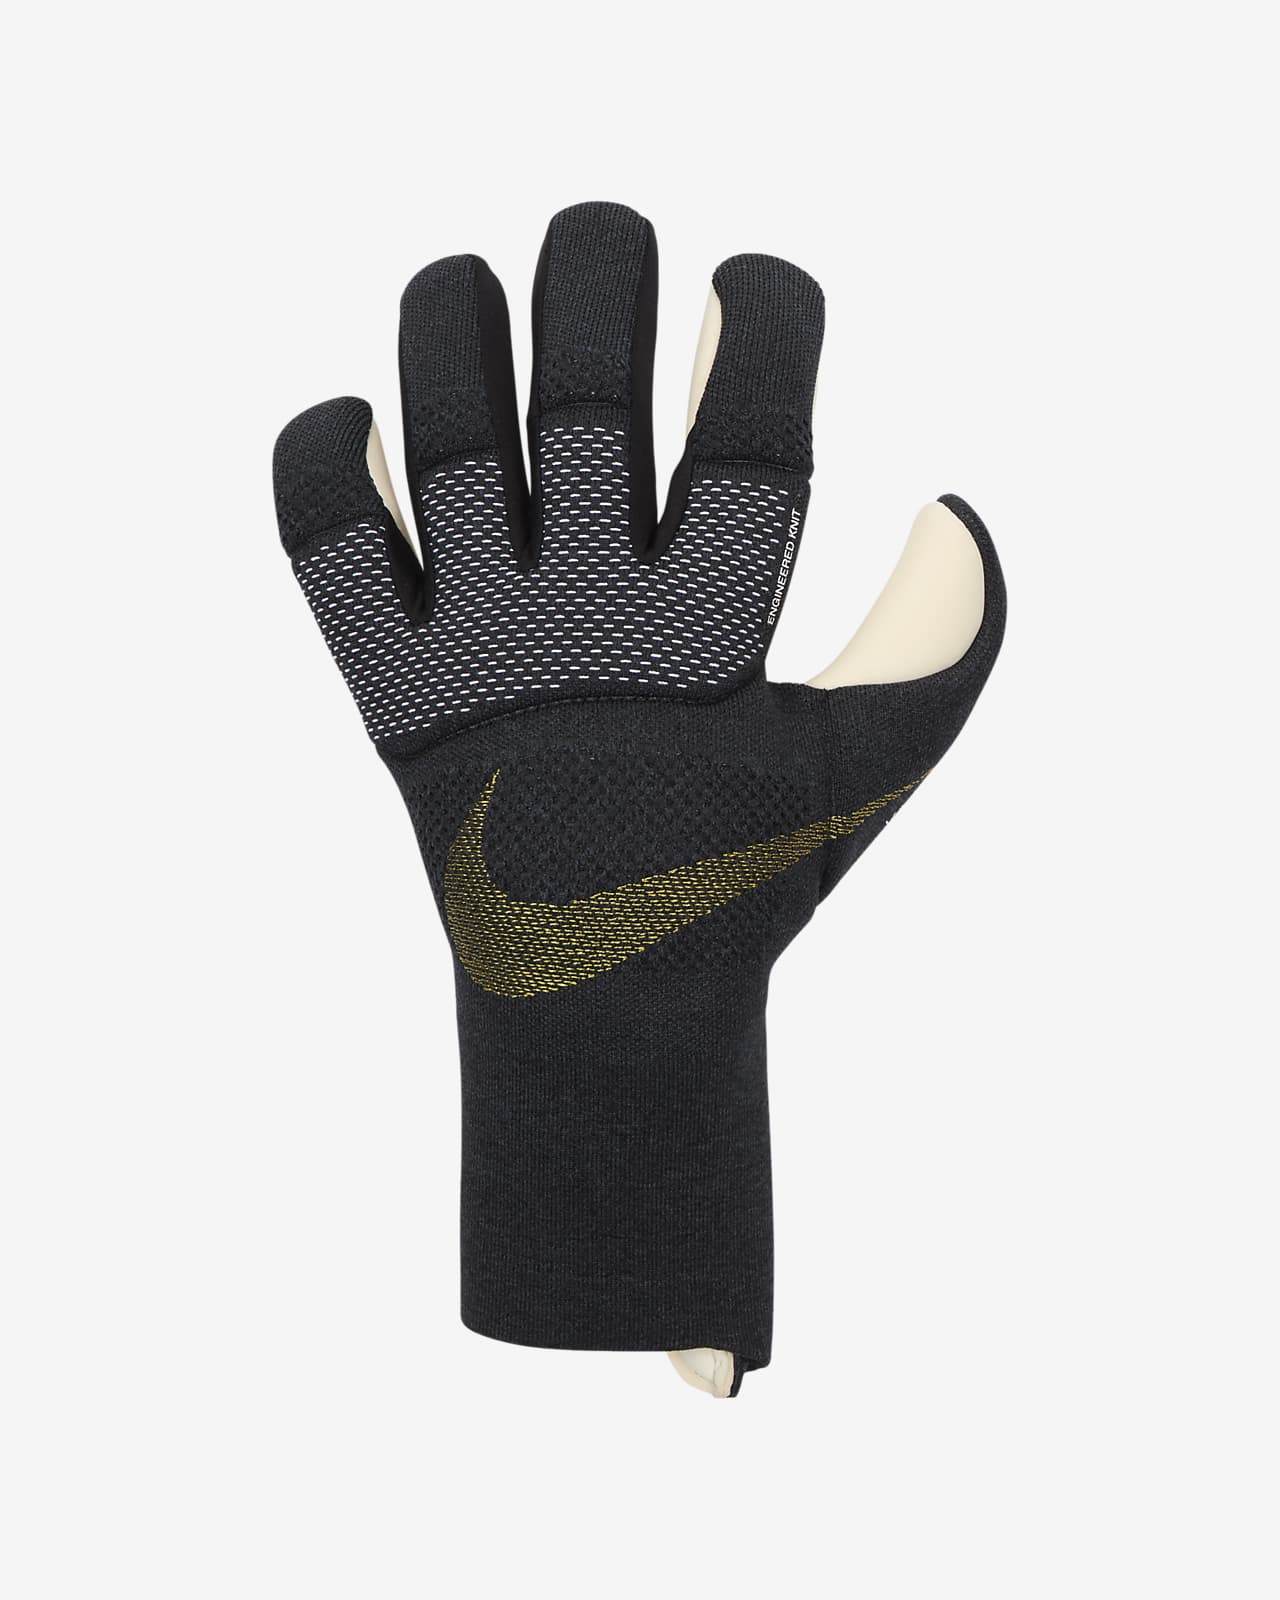 7 Pieces of Protective American Football Gear From Nike to Buy Now